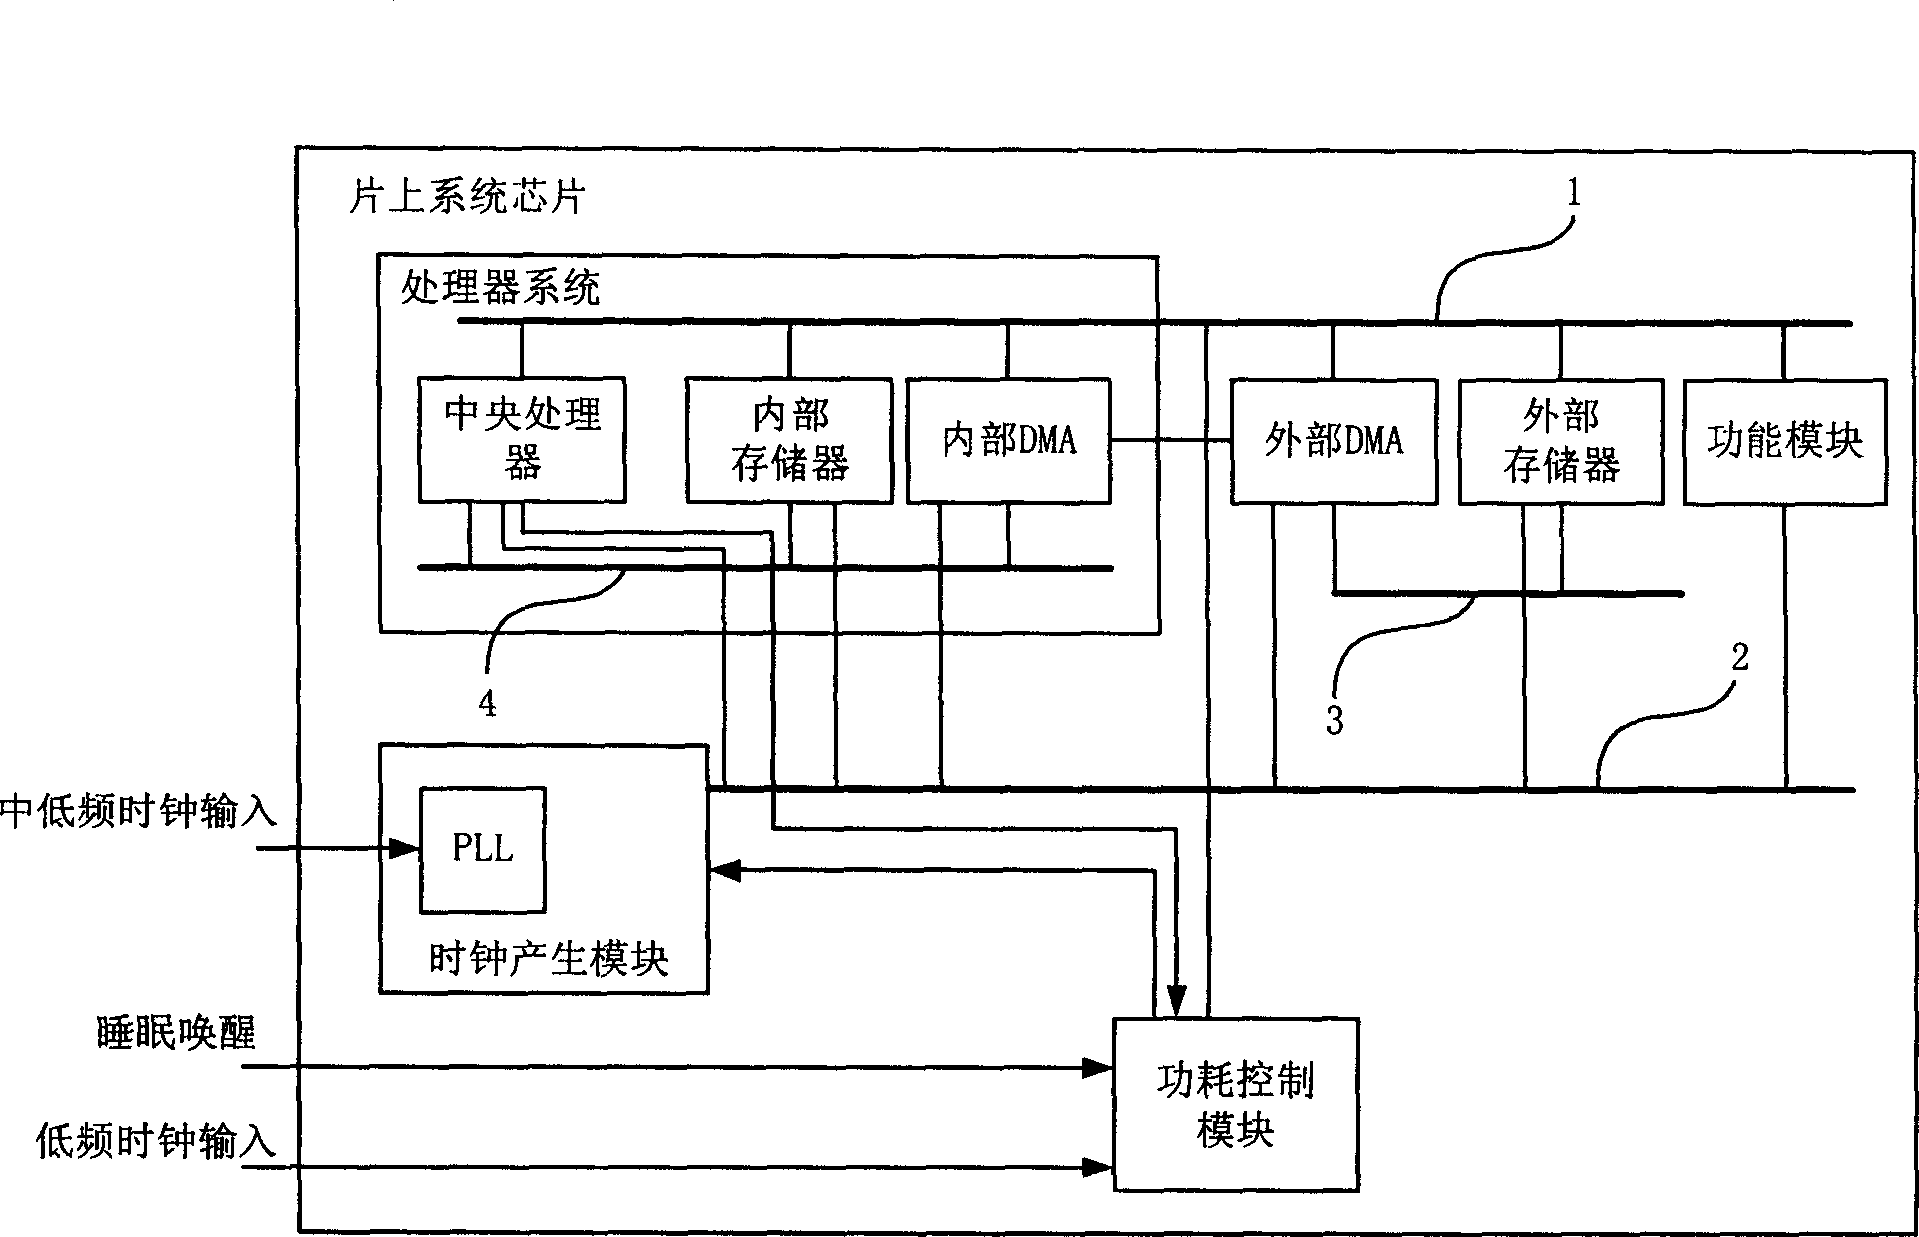 System-on-chip chip and its power consumption control method